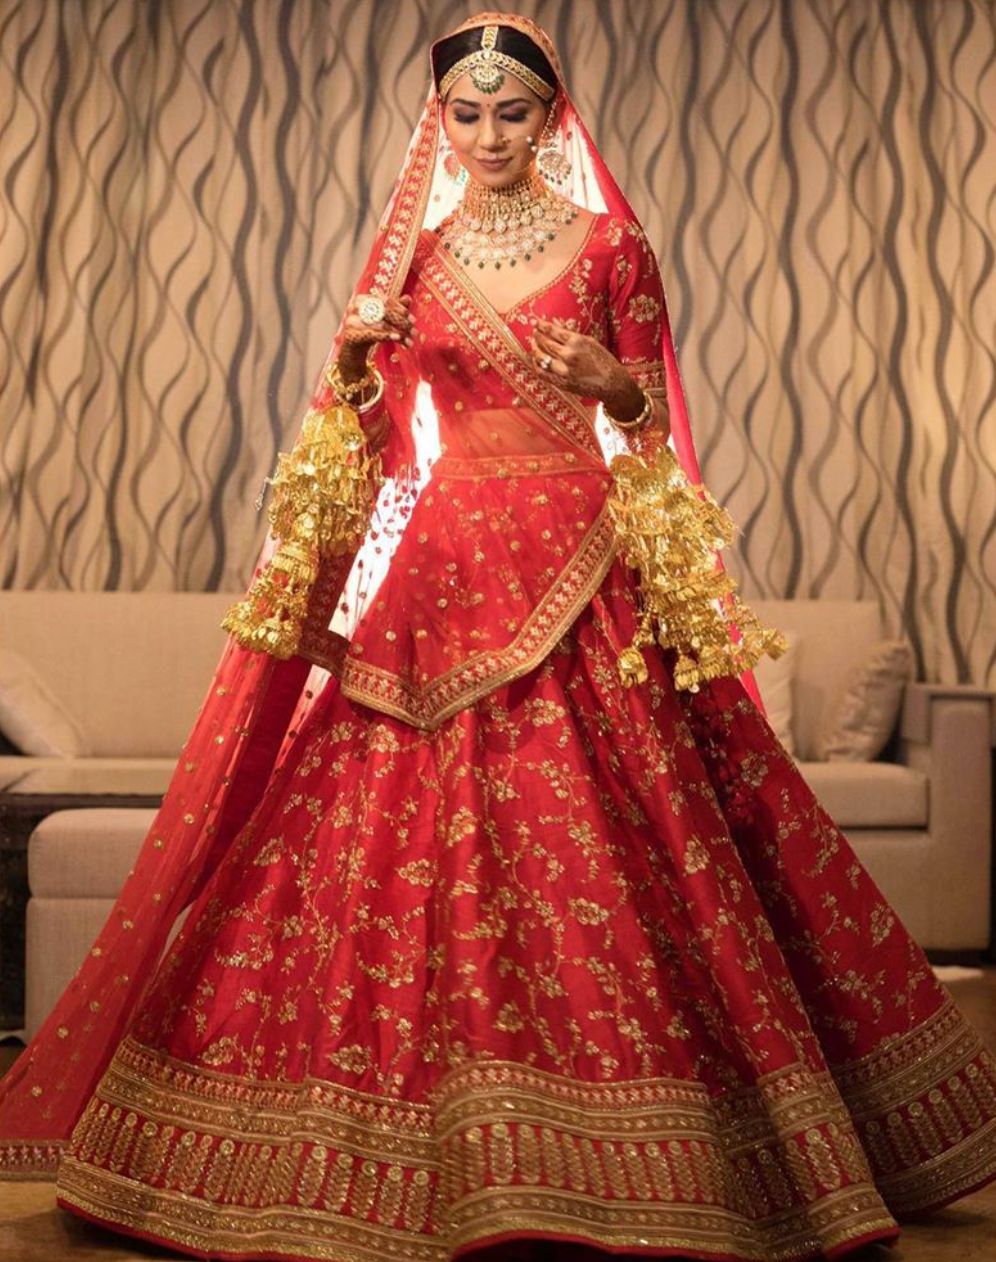 The Beauty of Textures - indian Bride in a Red Lehenga